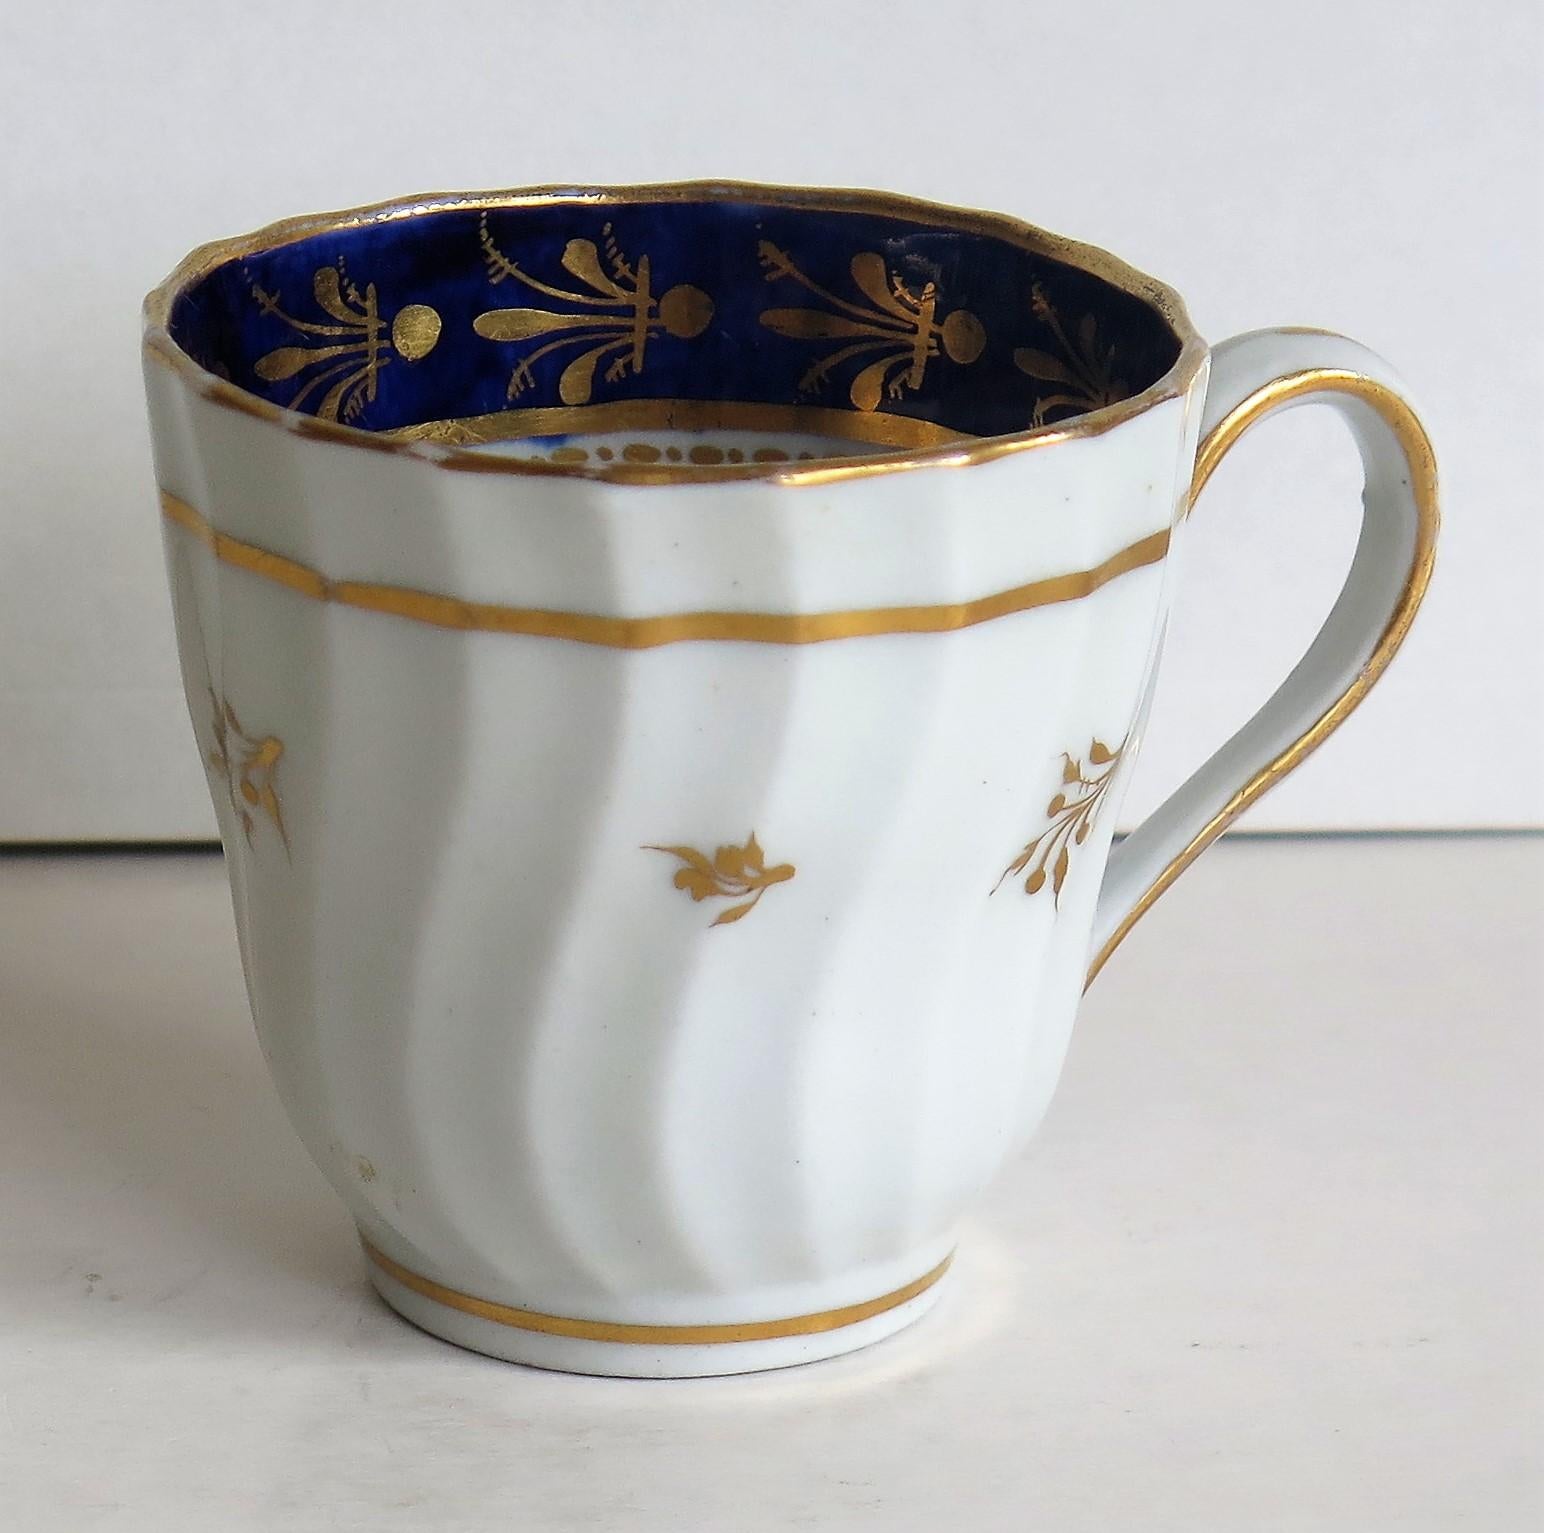 New Hall Porcelain Coffee Cup Shanked and Fluted Body Hand-Painted, circa 1795 2